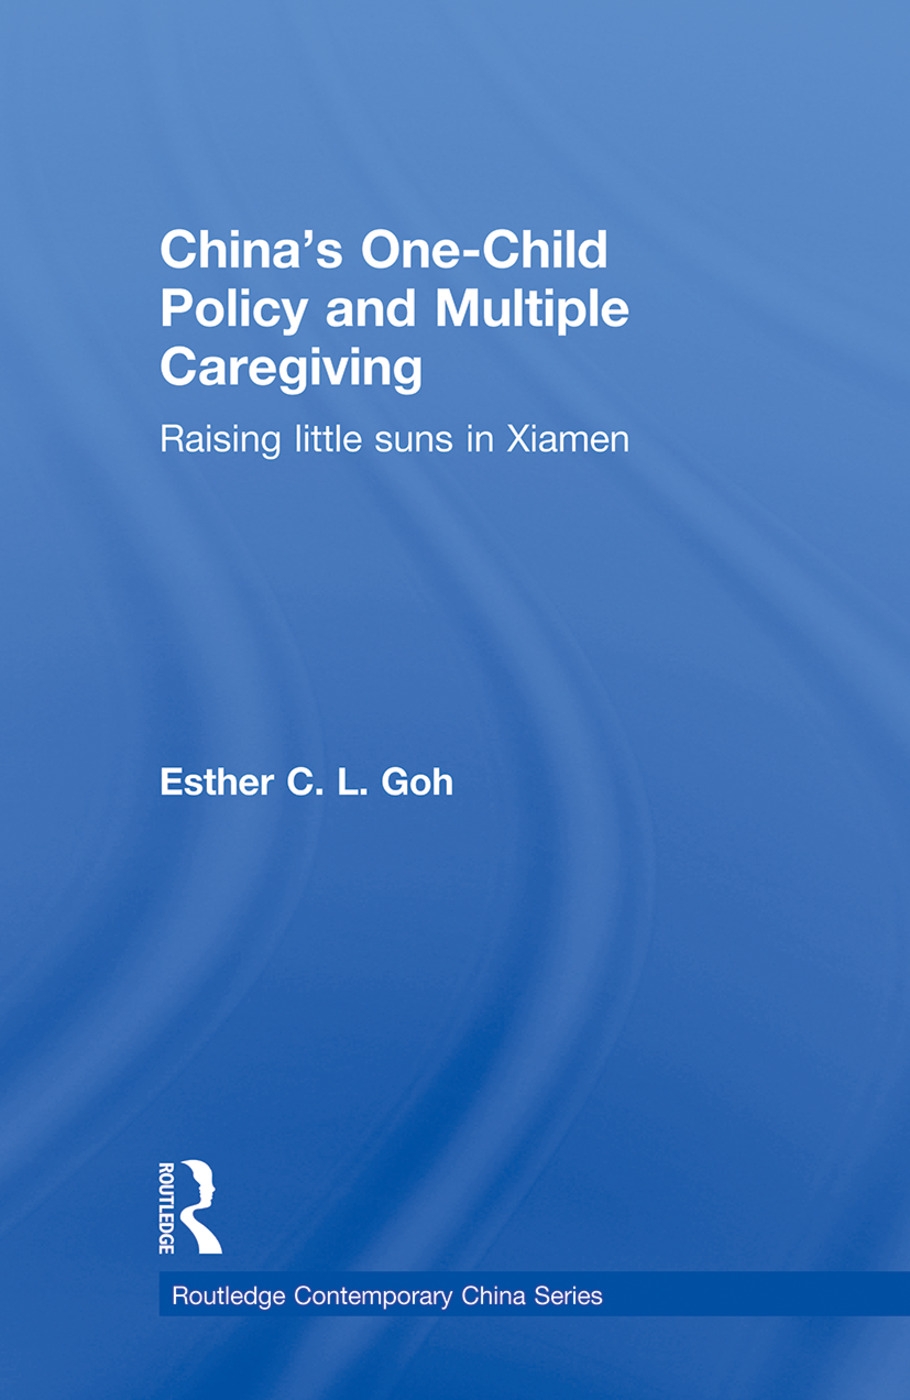 China’s One-Child Policy and Multiple Caregiving: Raising Little Suns in Xiamen